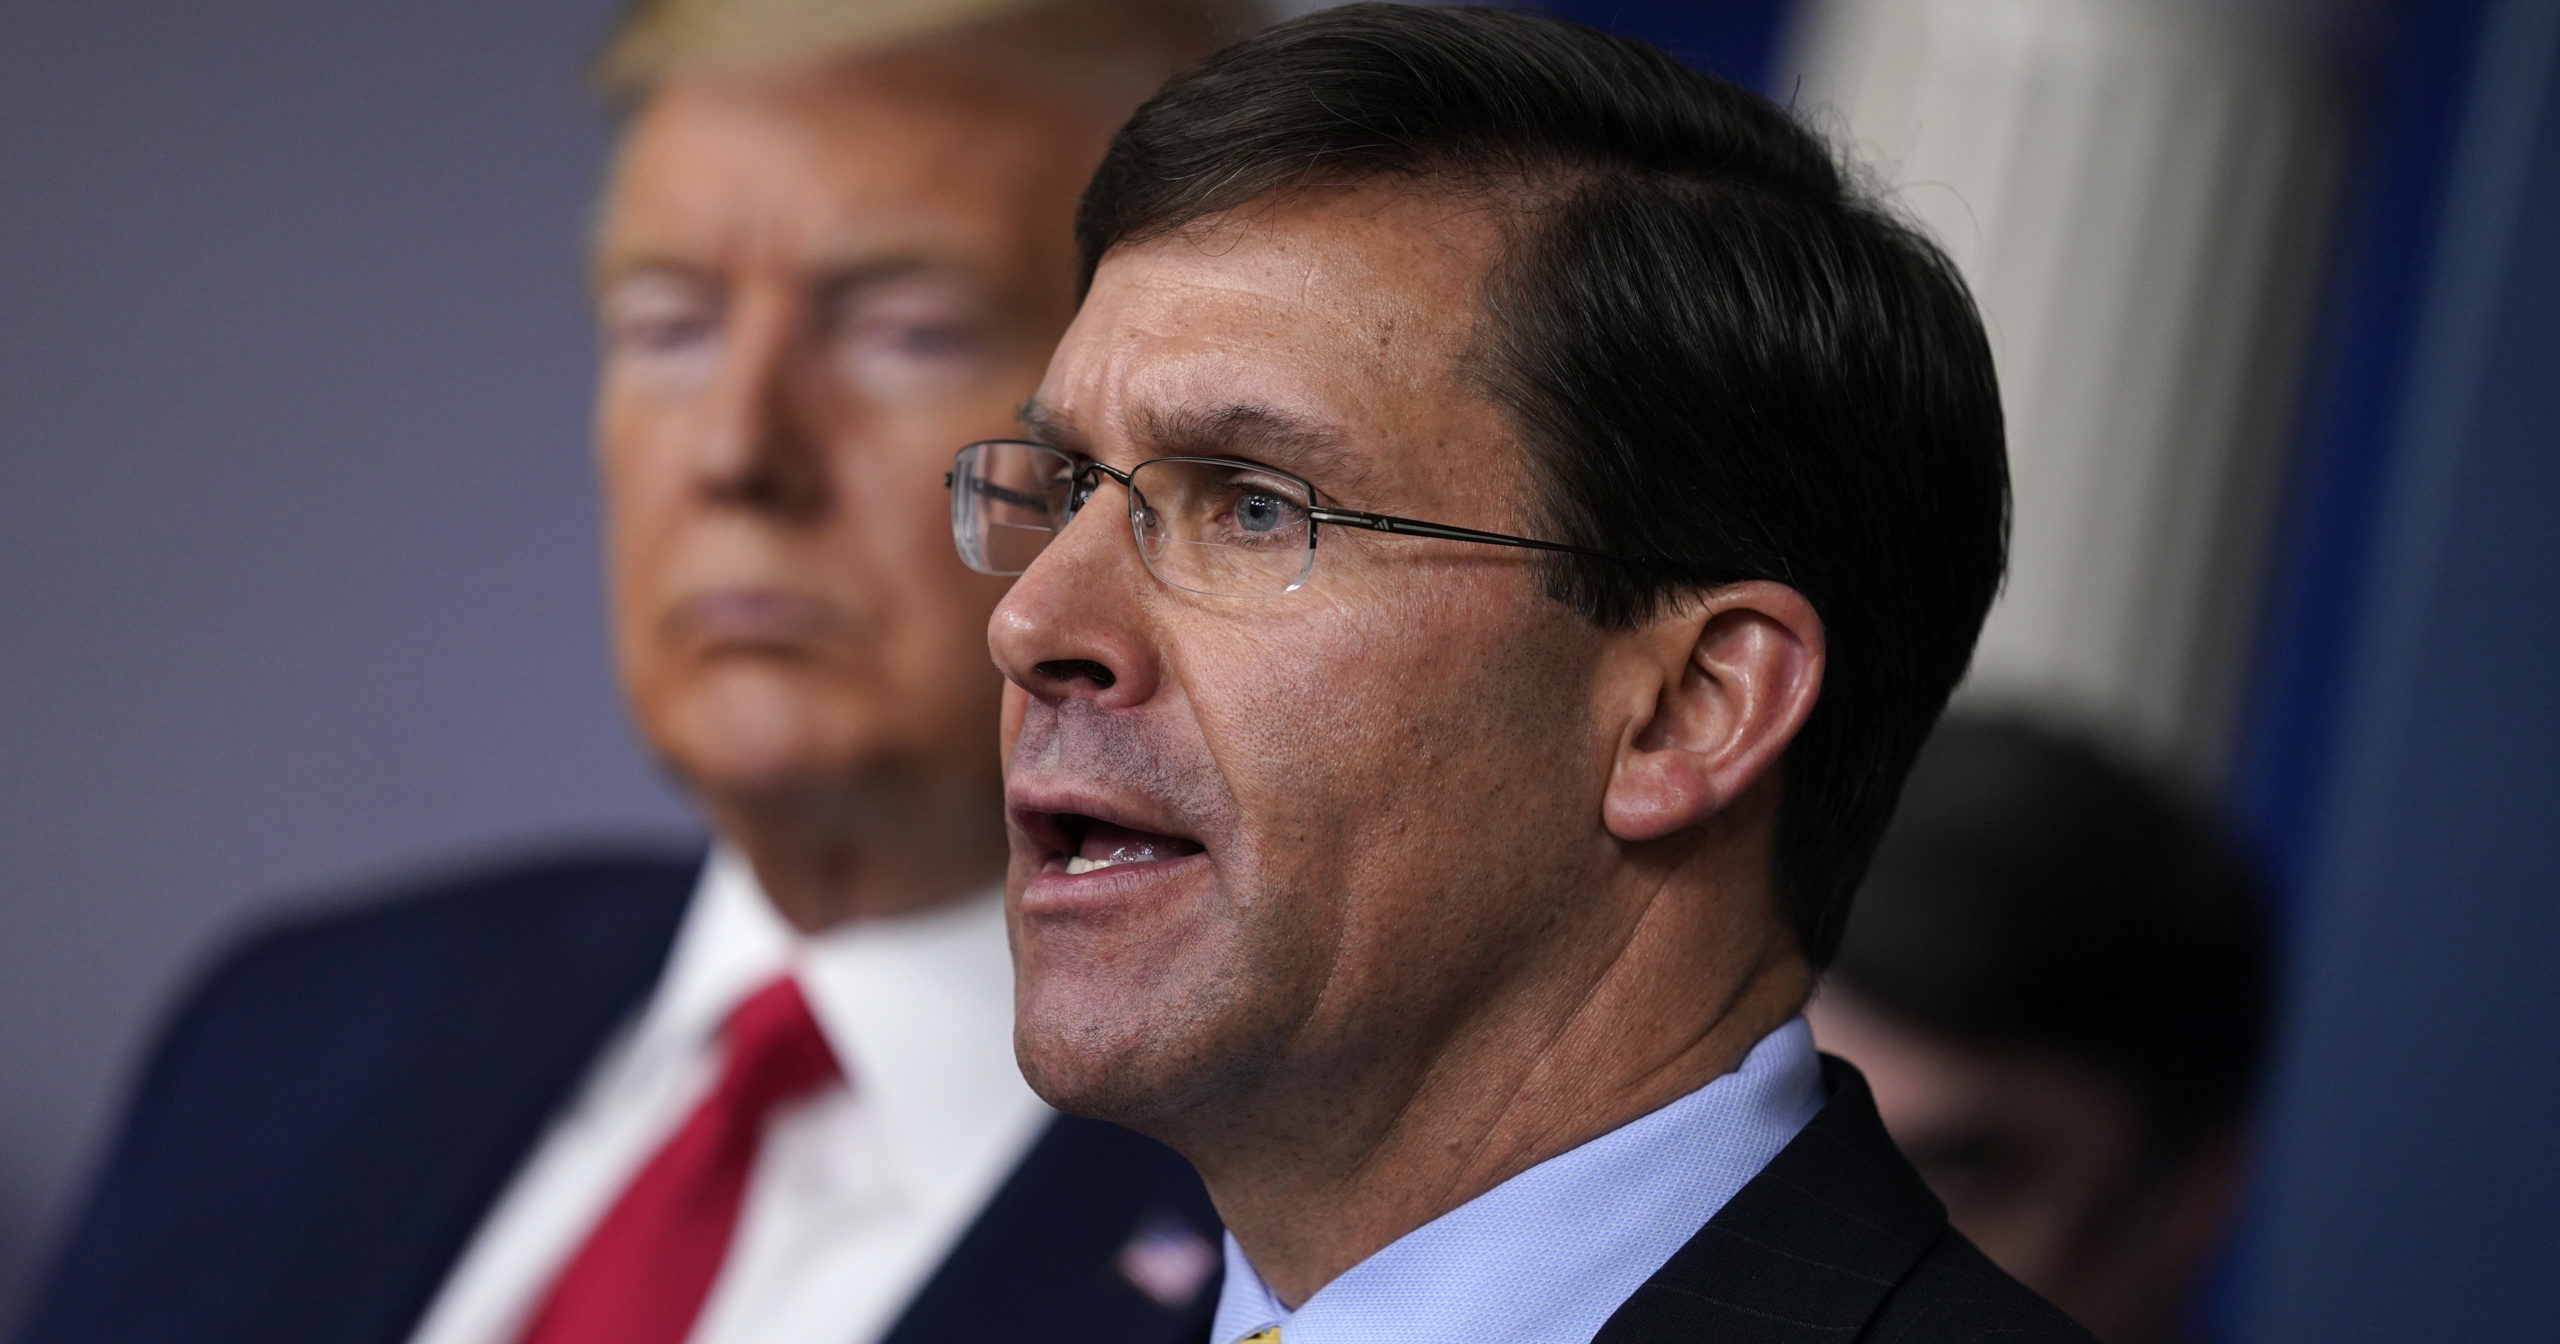 In this March 18, 2020, file photo, Defense Secretary Mark Esper speaks as President Donald Trump listens during a briefing at the White House in Washington, D.C.